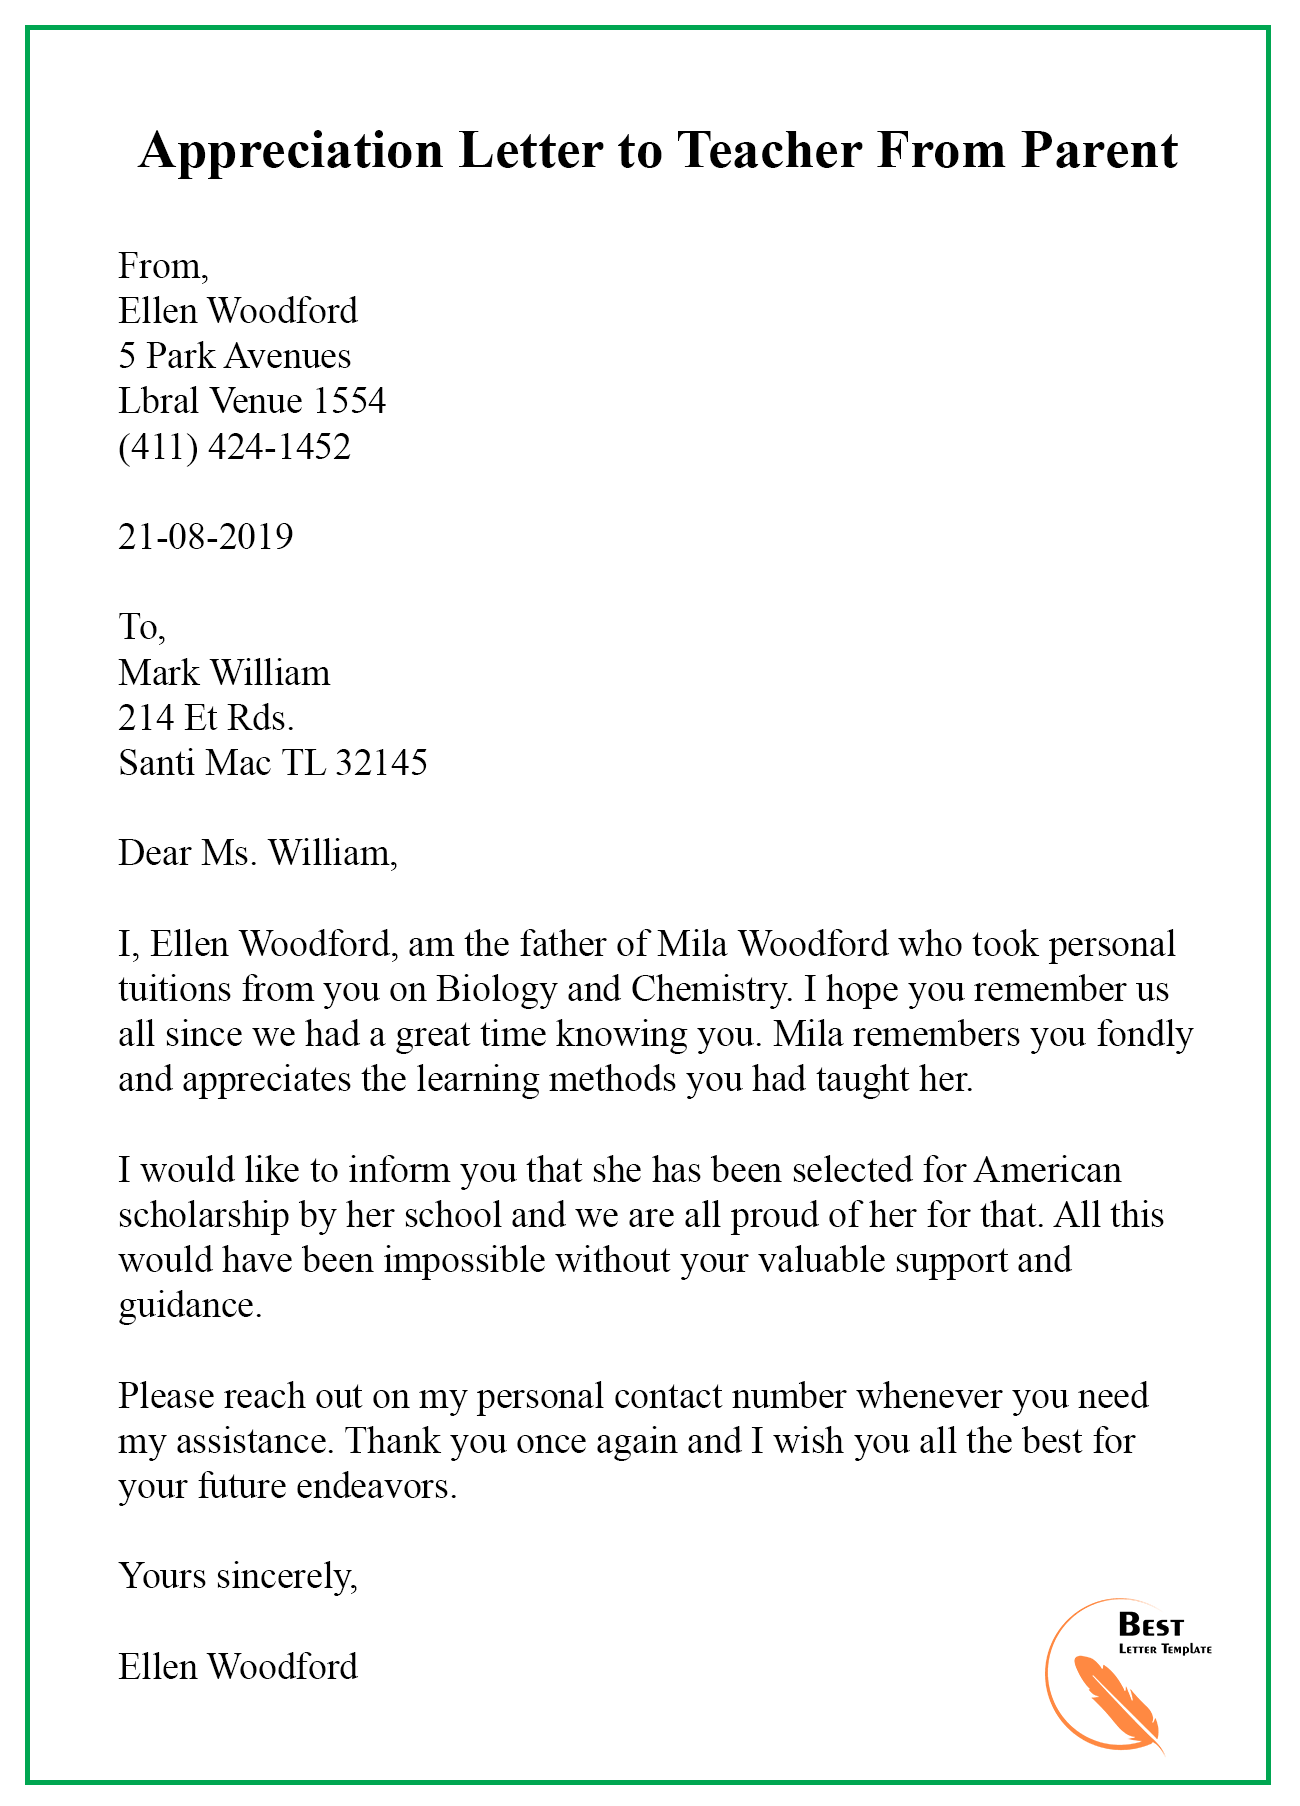 letter-to-my-teacher-template-free